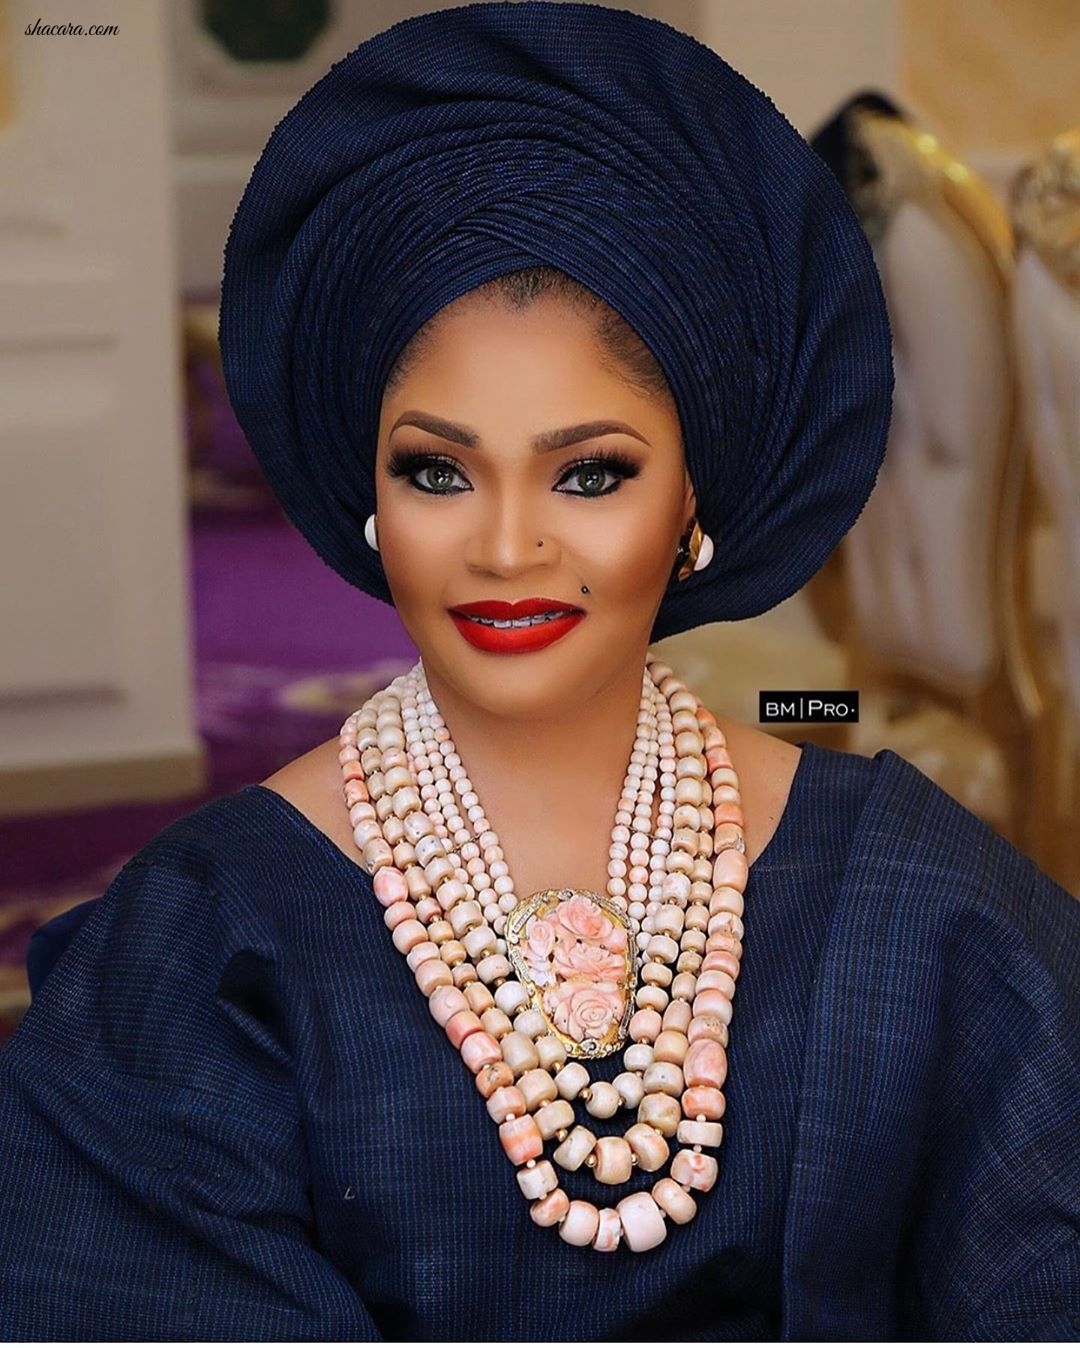 Taiwos Touch Is Creating Some Of The Best Gele’s With Fab Jewelry Styling Inspiration To Go With It